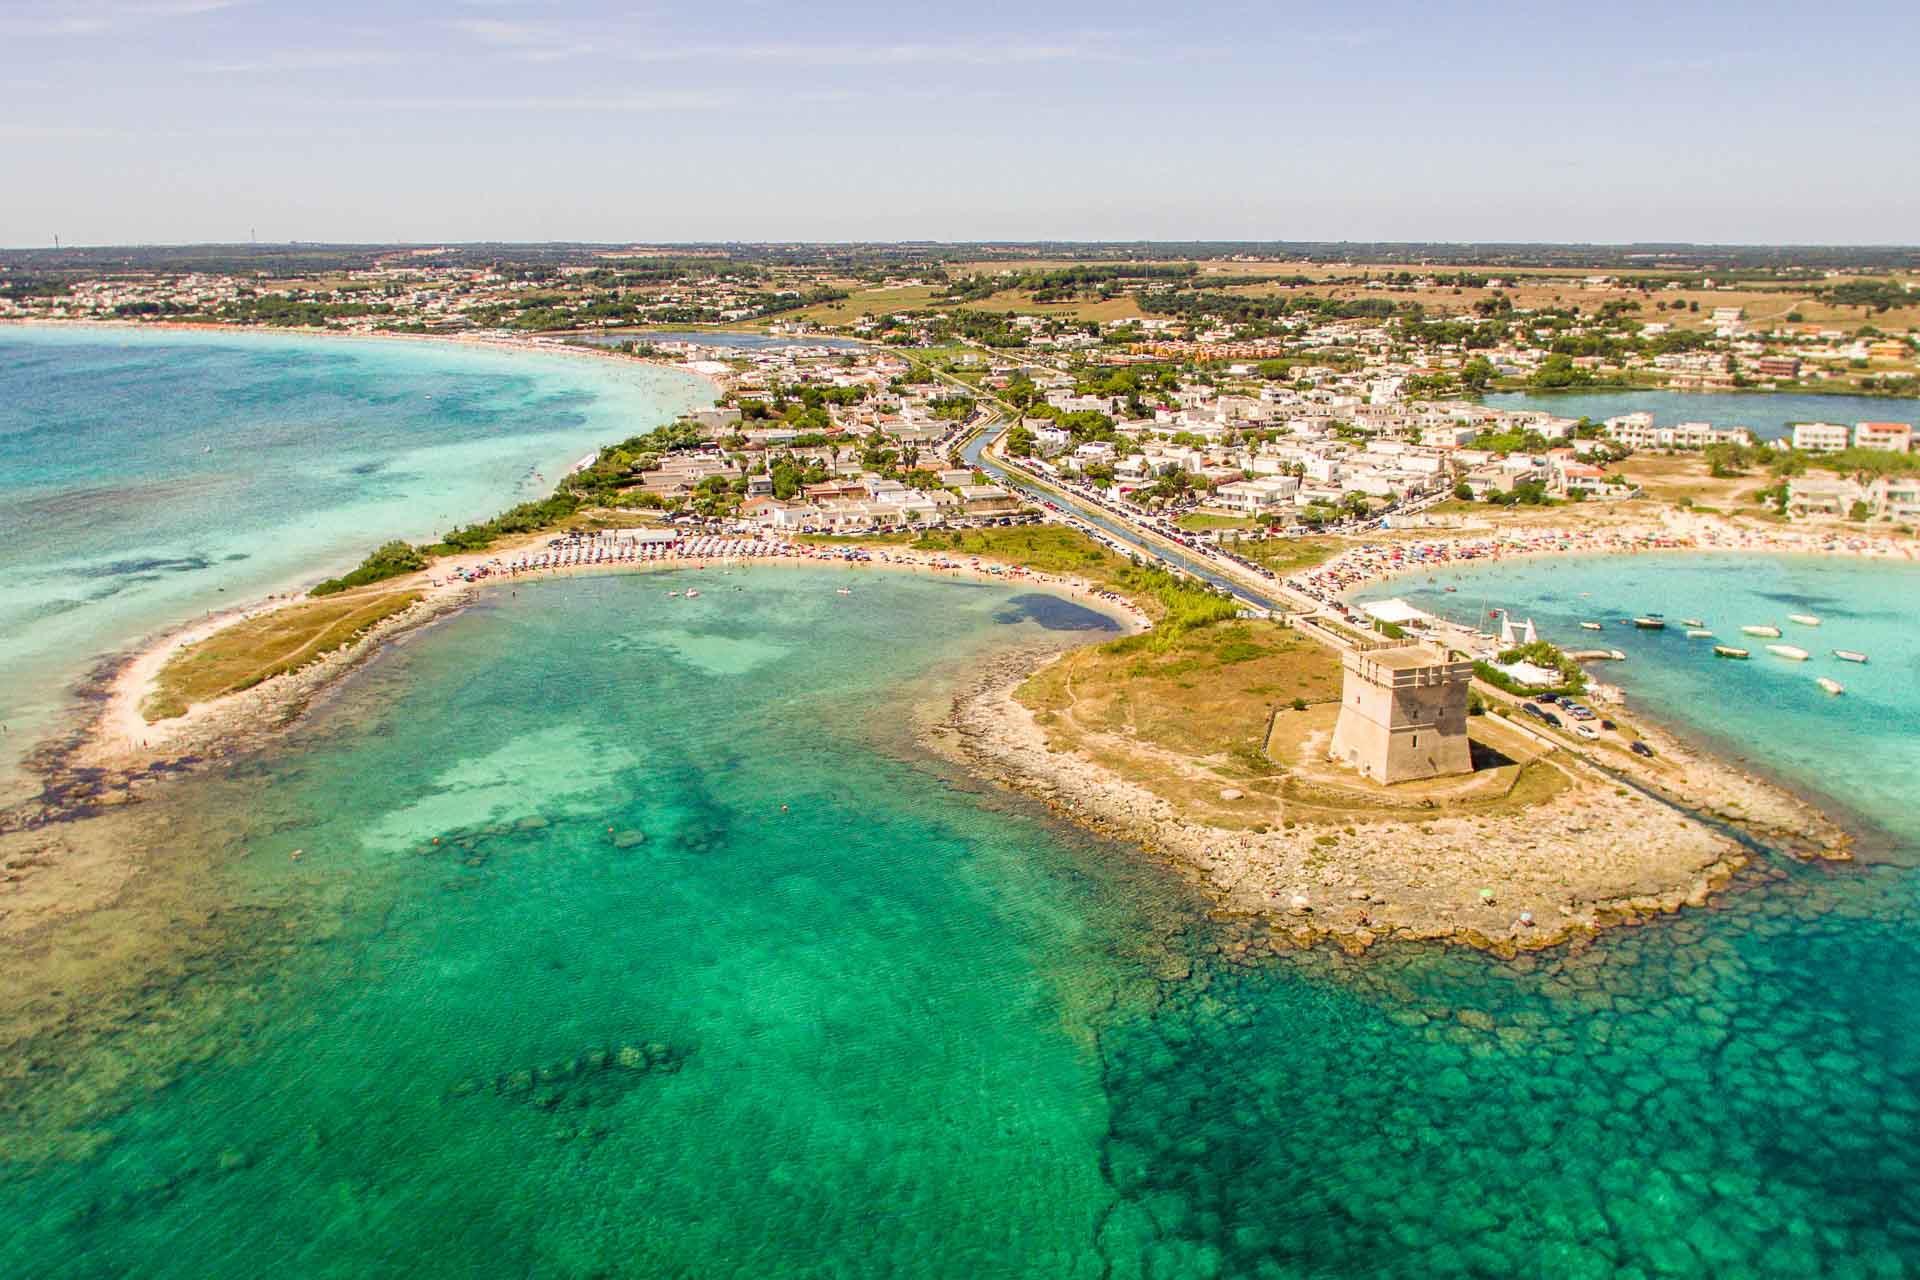 Aerial view of torre chiara, an islet with a tower surrounded by crystal clear water